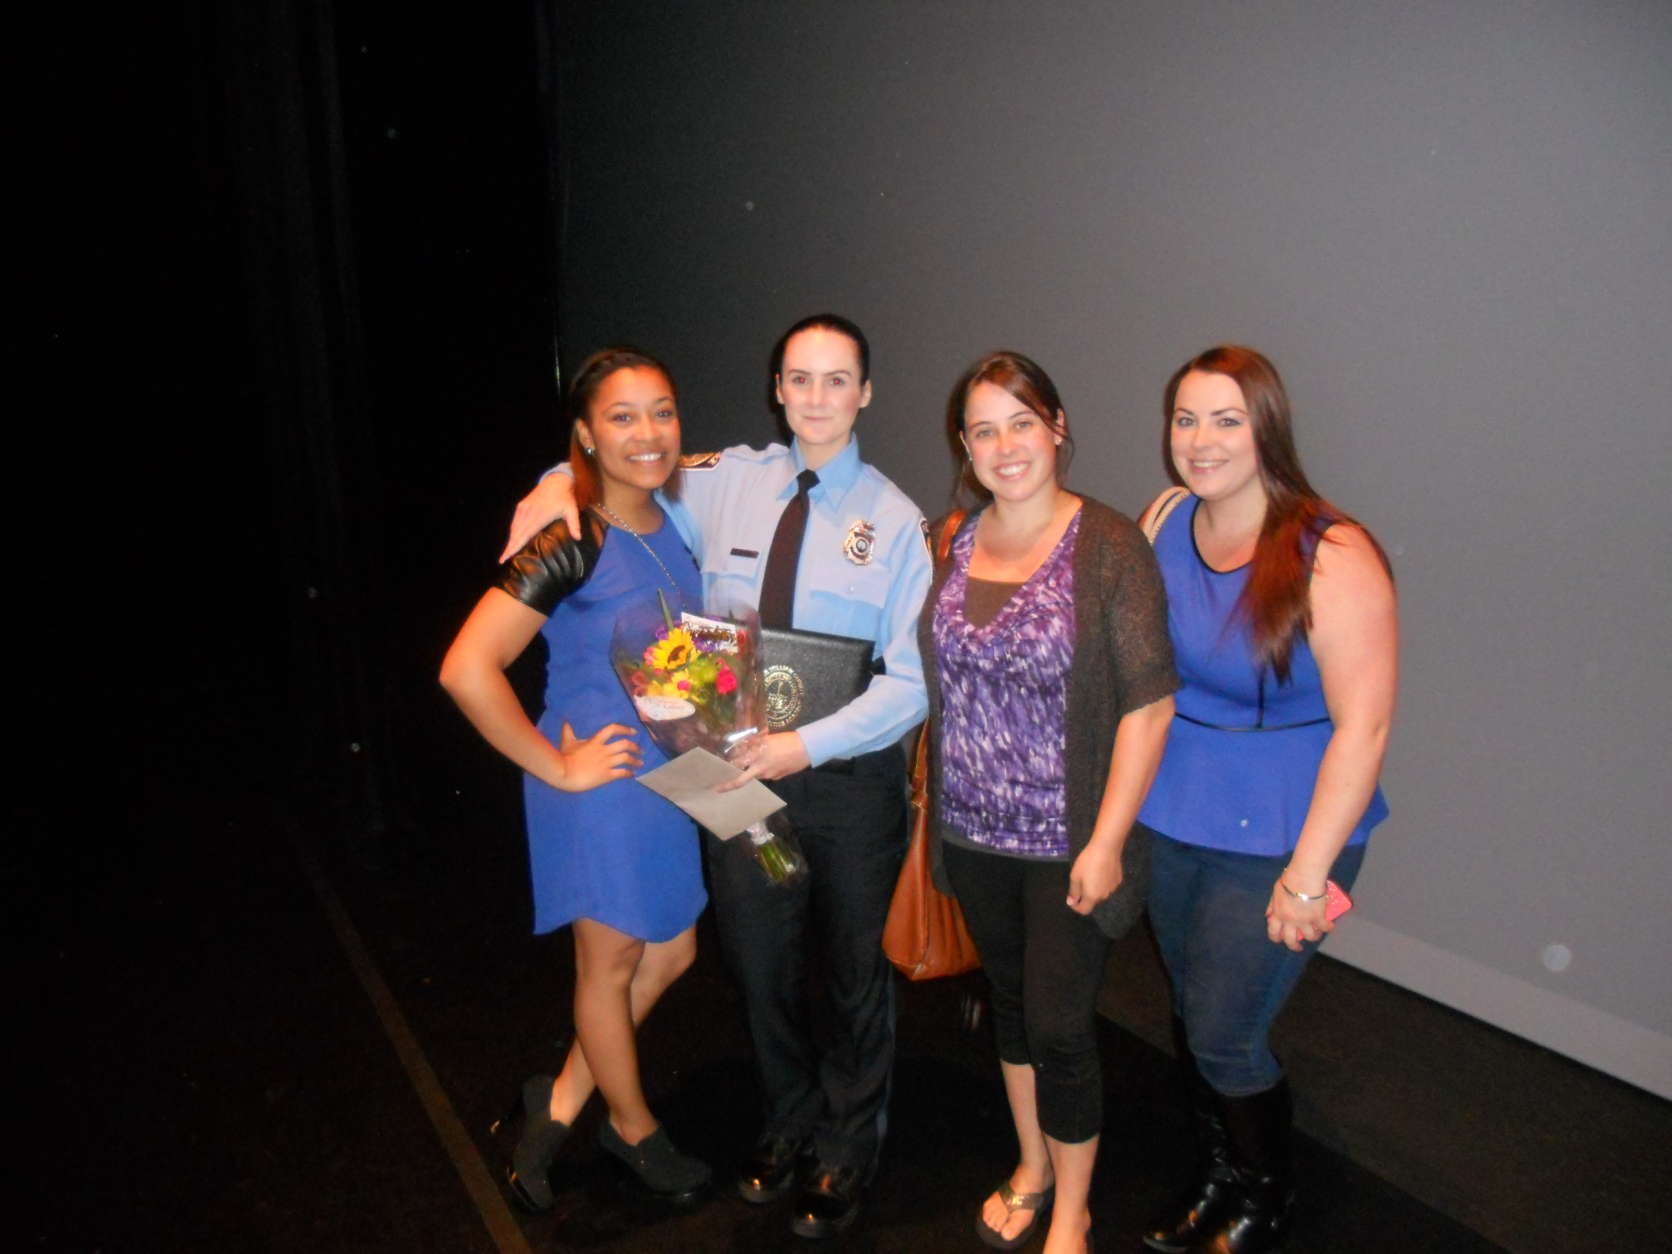 Ashley Guindon (second from left) is pictured with friends at the Police Academy Graduation. (Courtesy Stephanie Guindon)